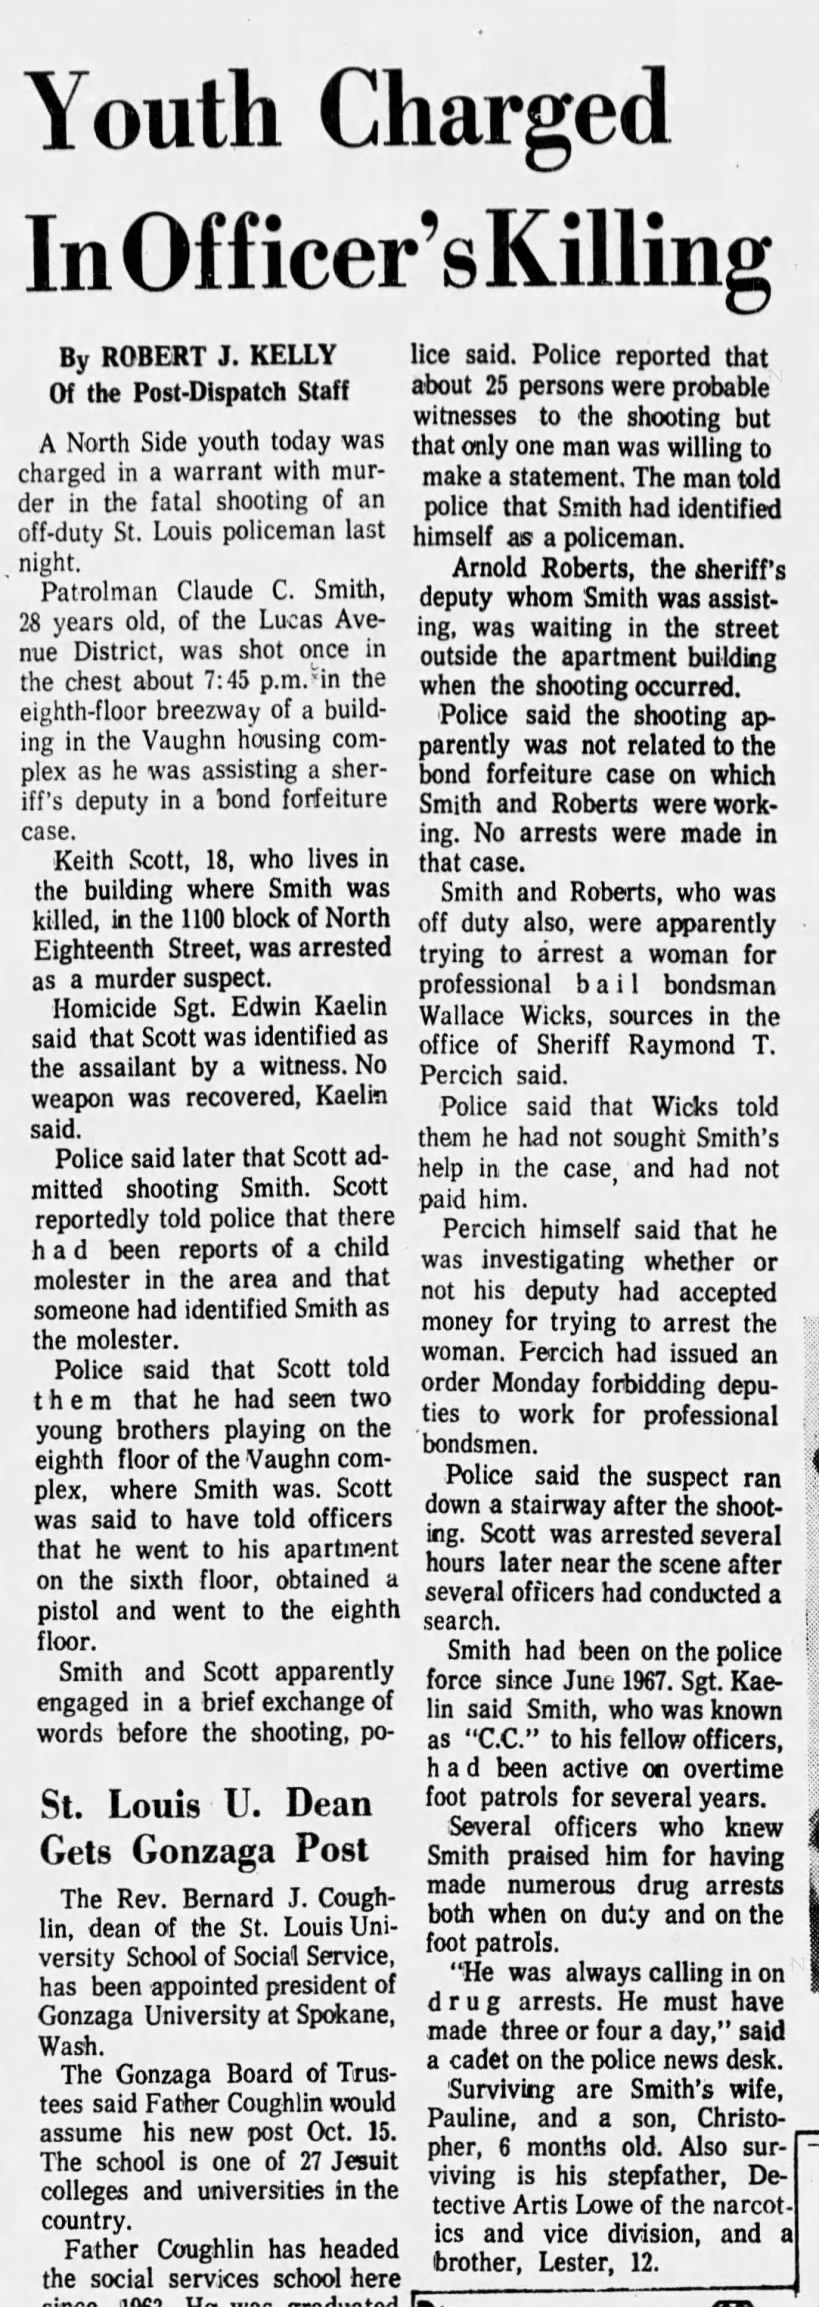 Officer Claude Smith death in the Post-Dispatch